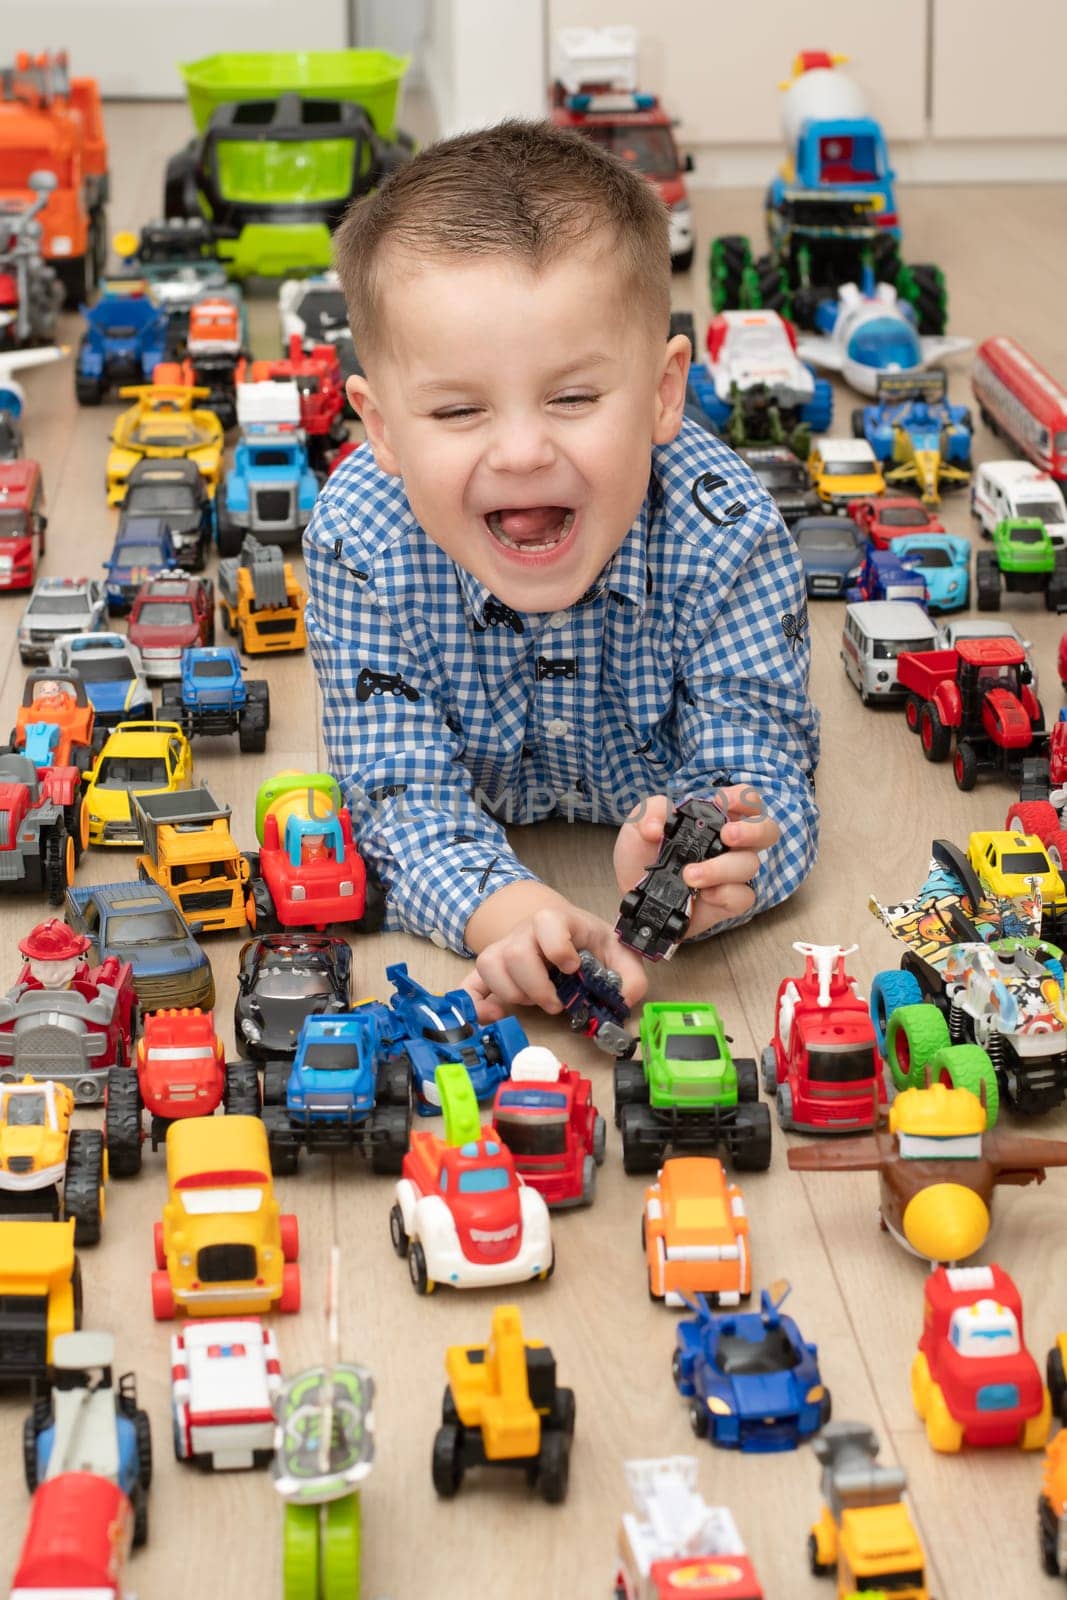 Concept of children's toys. A little boy, 4 years old, plays happily, lying on the floor, with colorful small and large cars in the children's room. Soft focus.